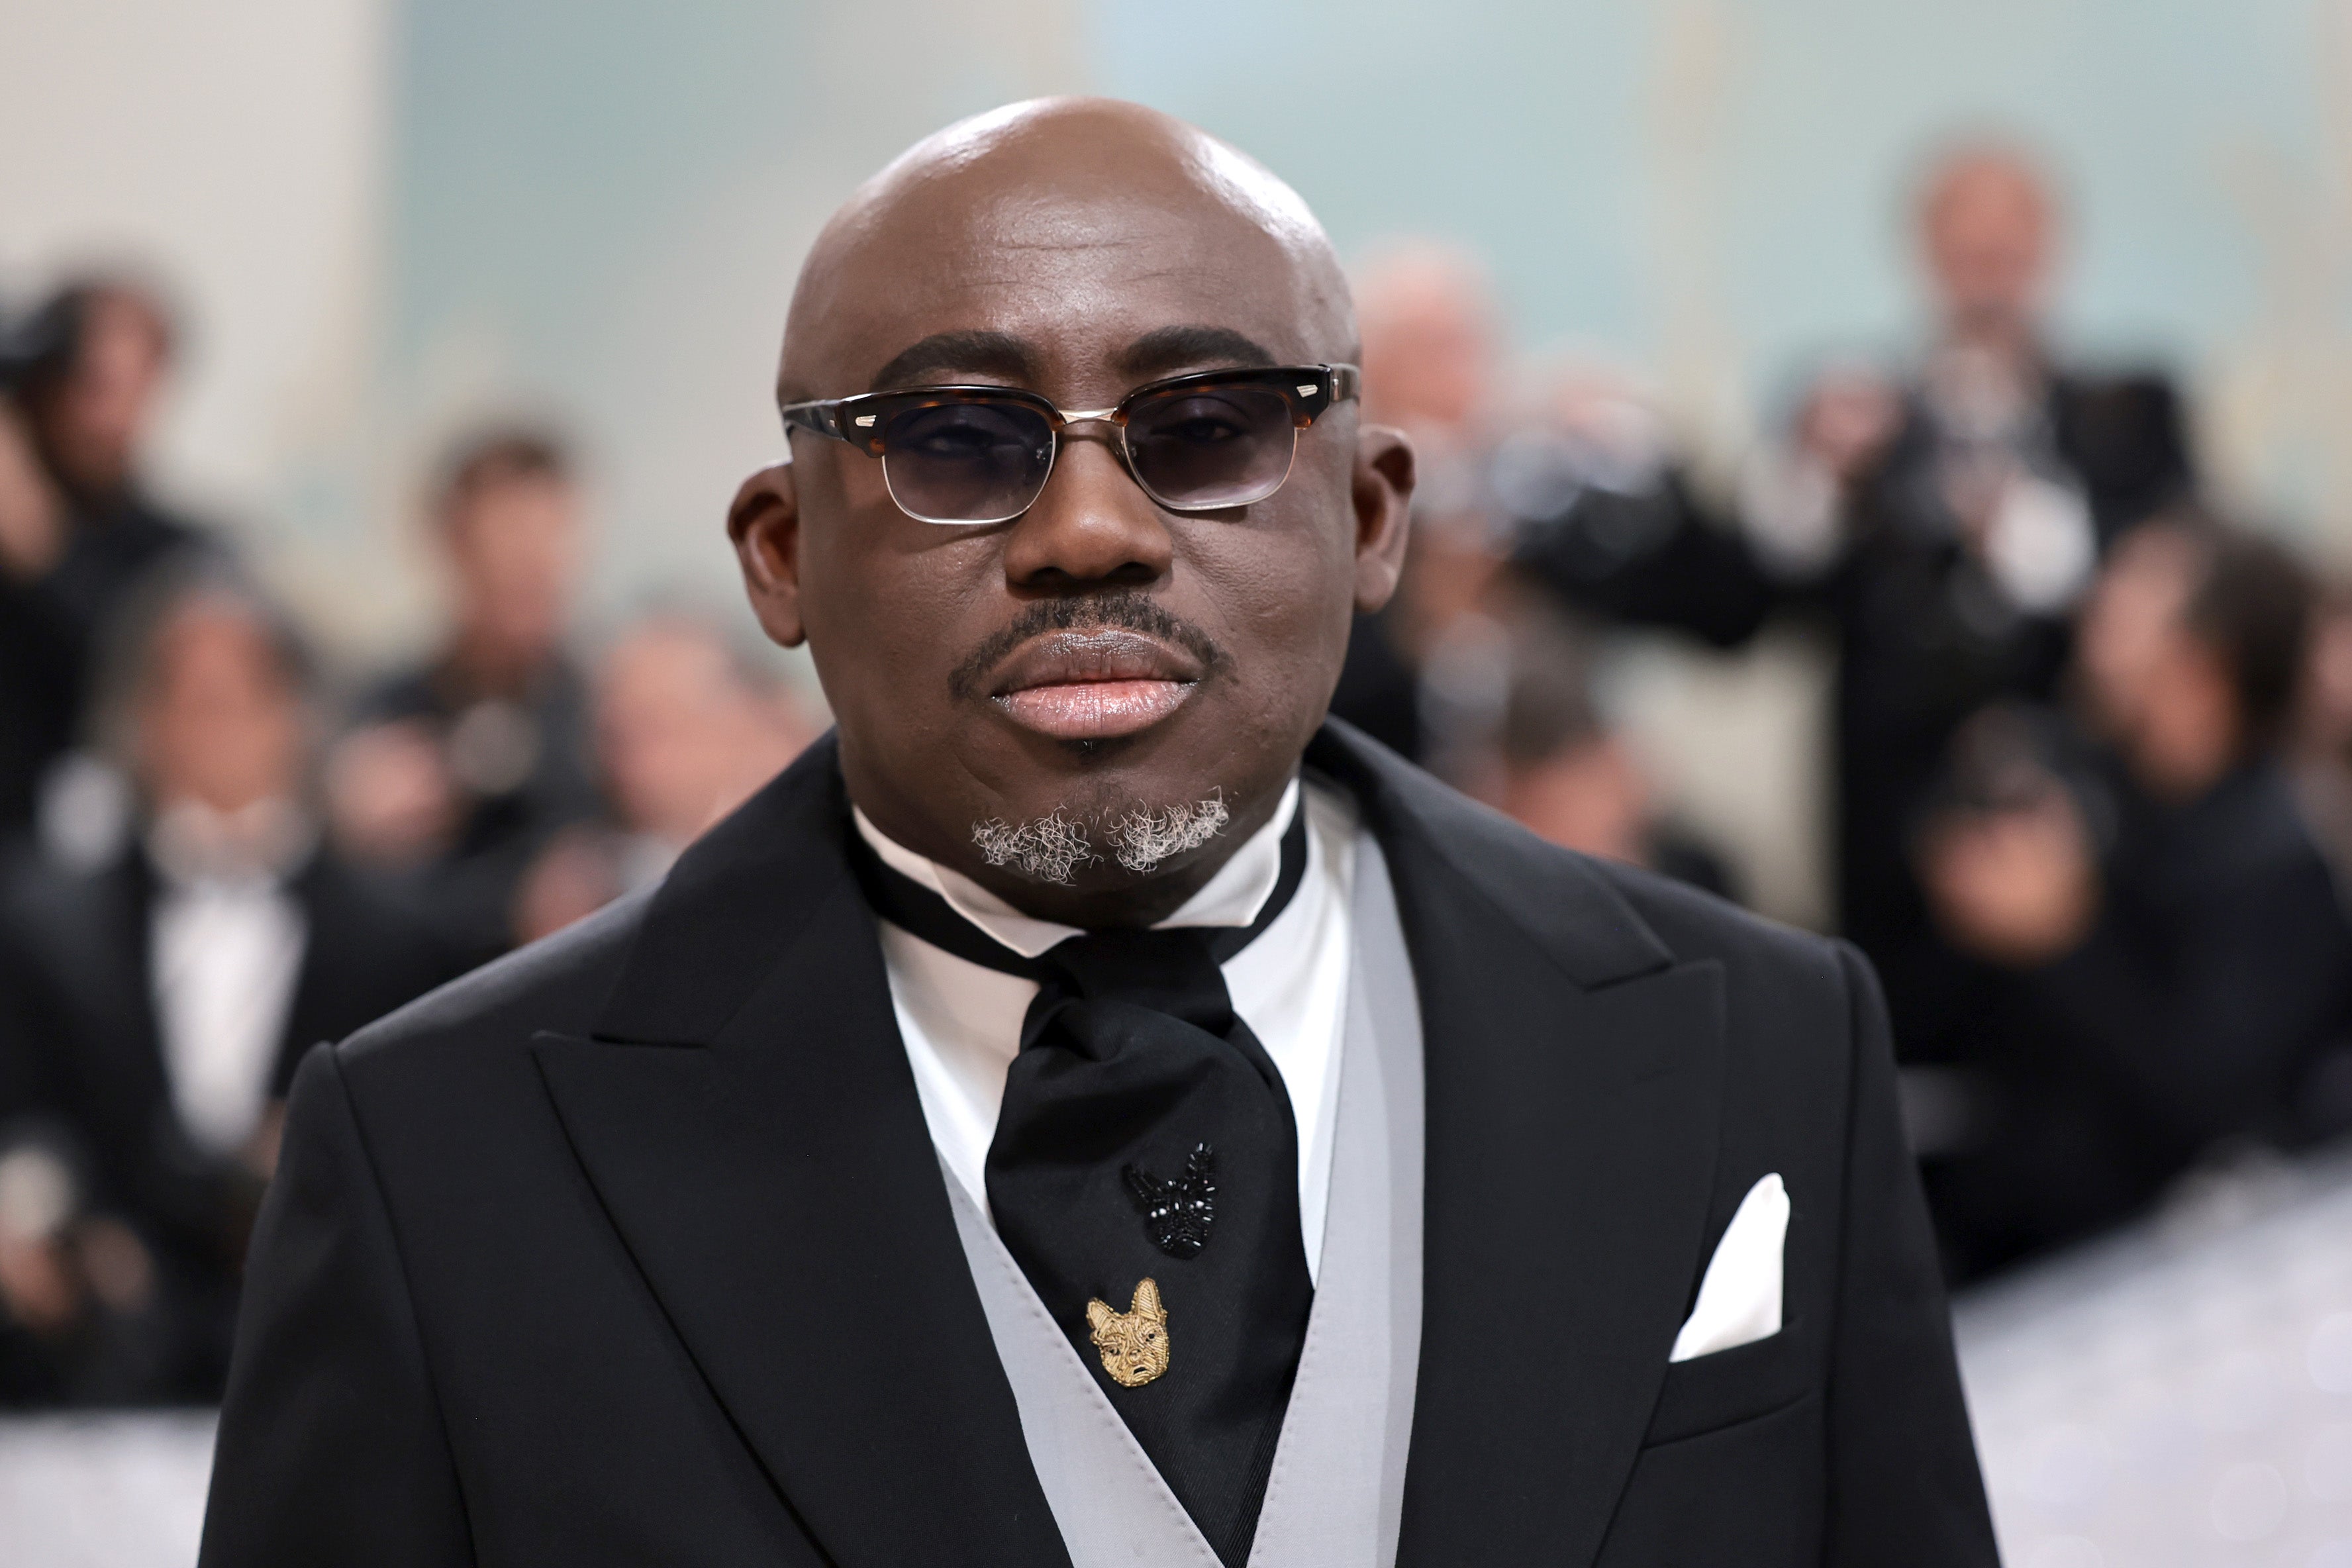 Edward Enninful became the first black gay man to edit the magazine